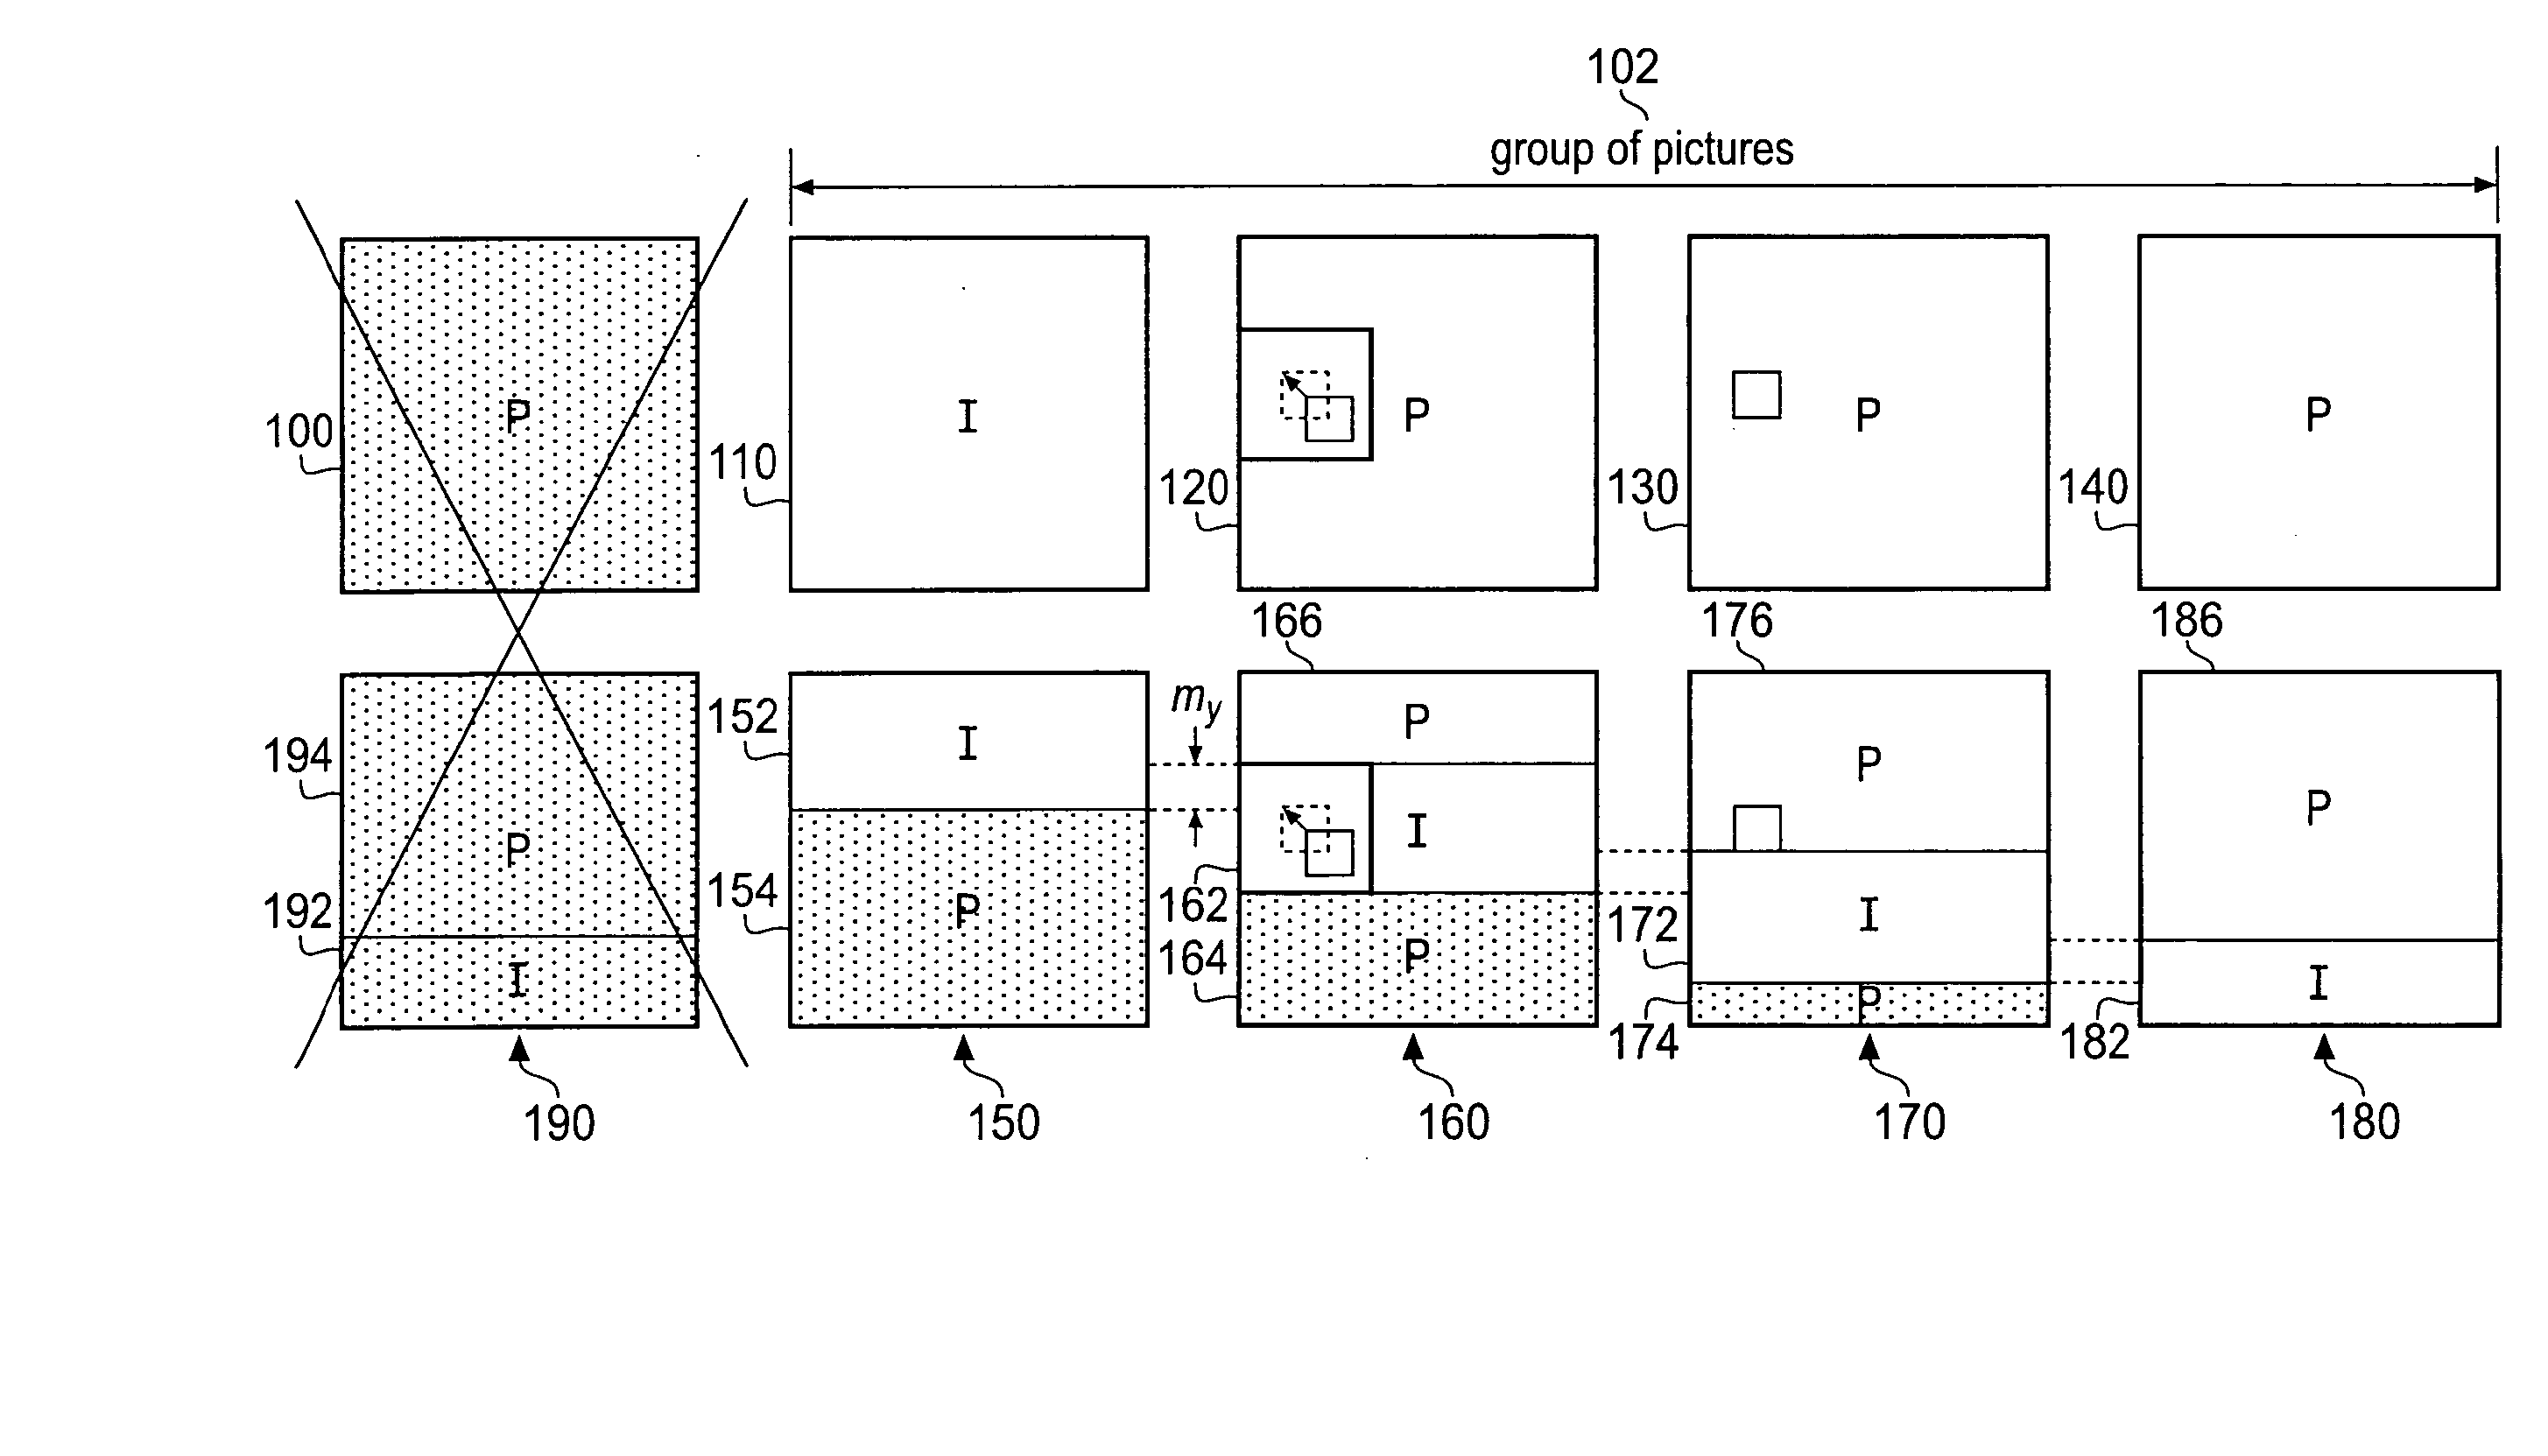 Method and device for video encoding and decoding